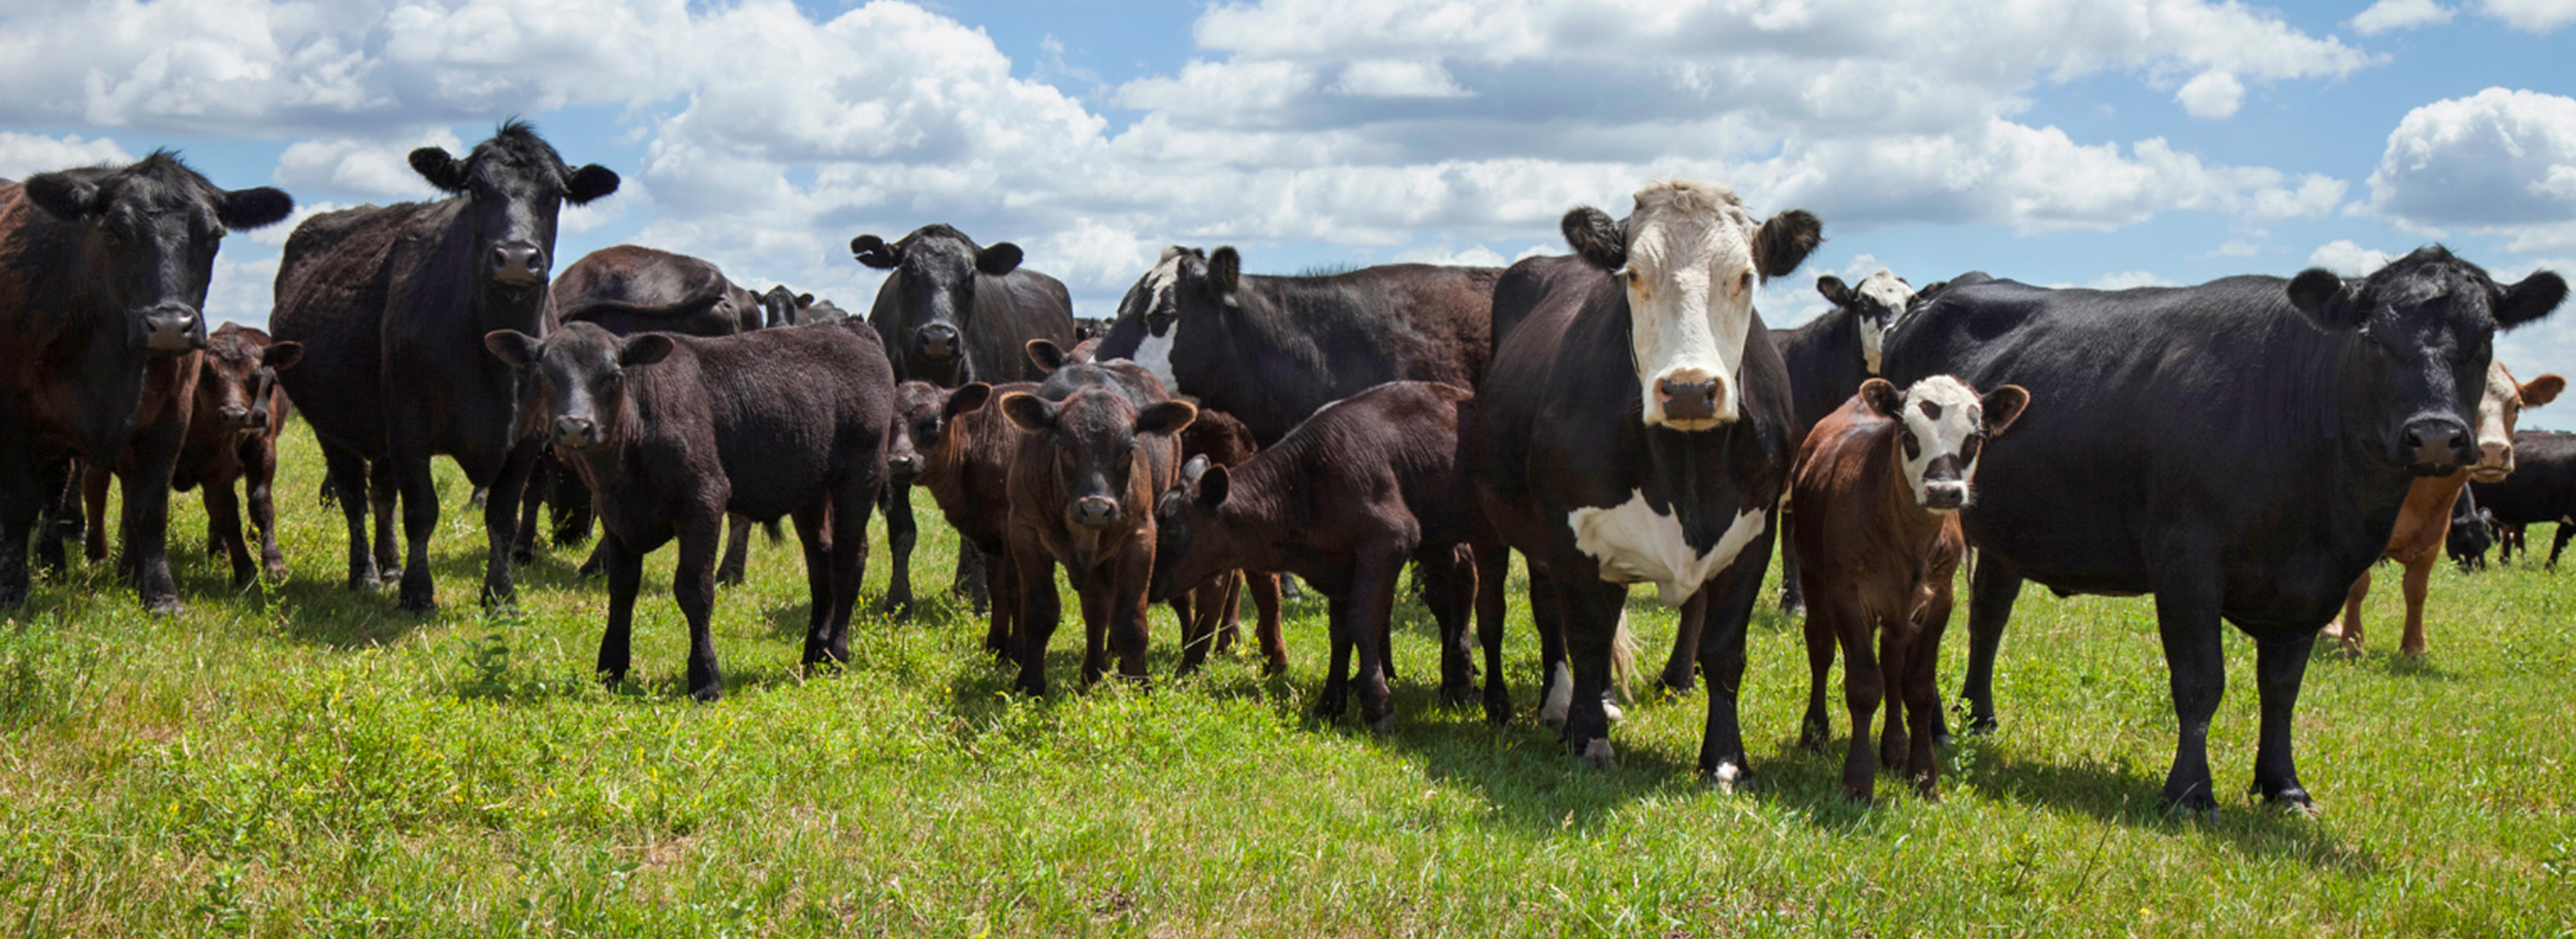 Group of cows and calves standing in a pasture